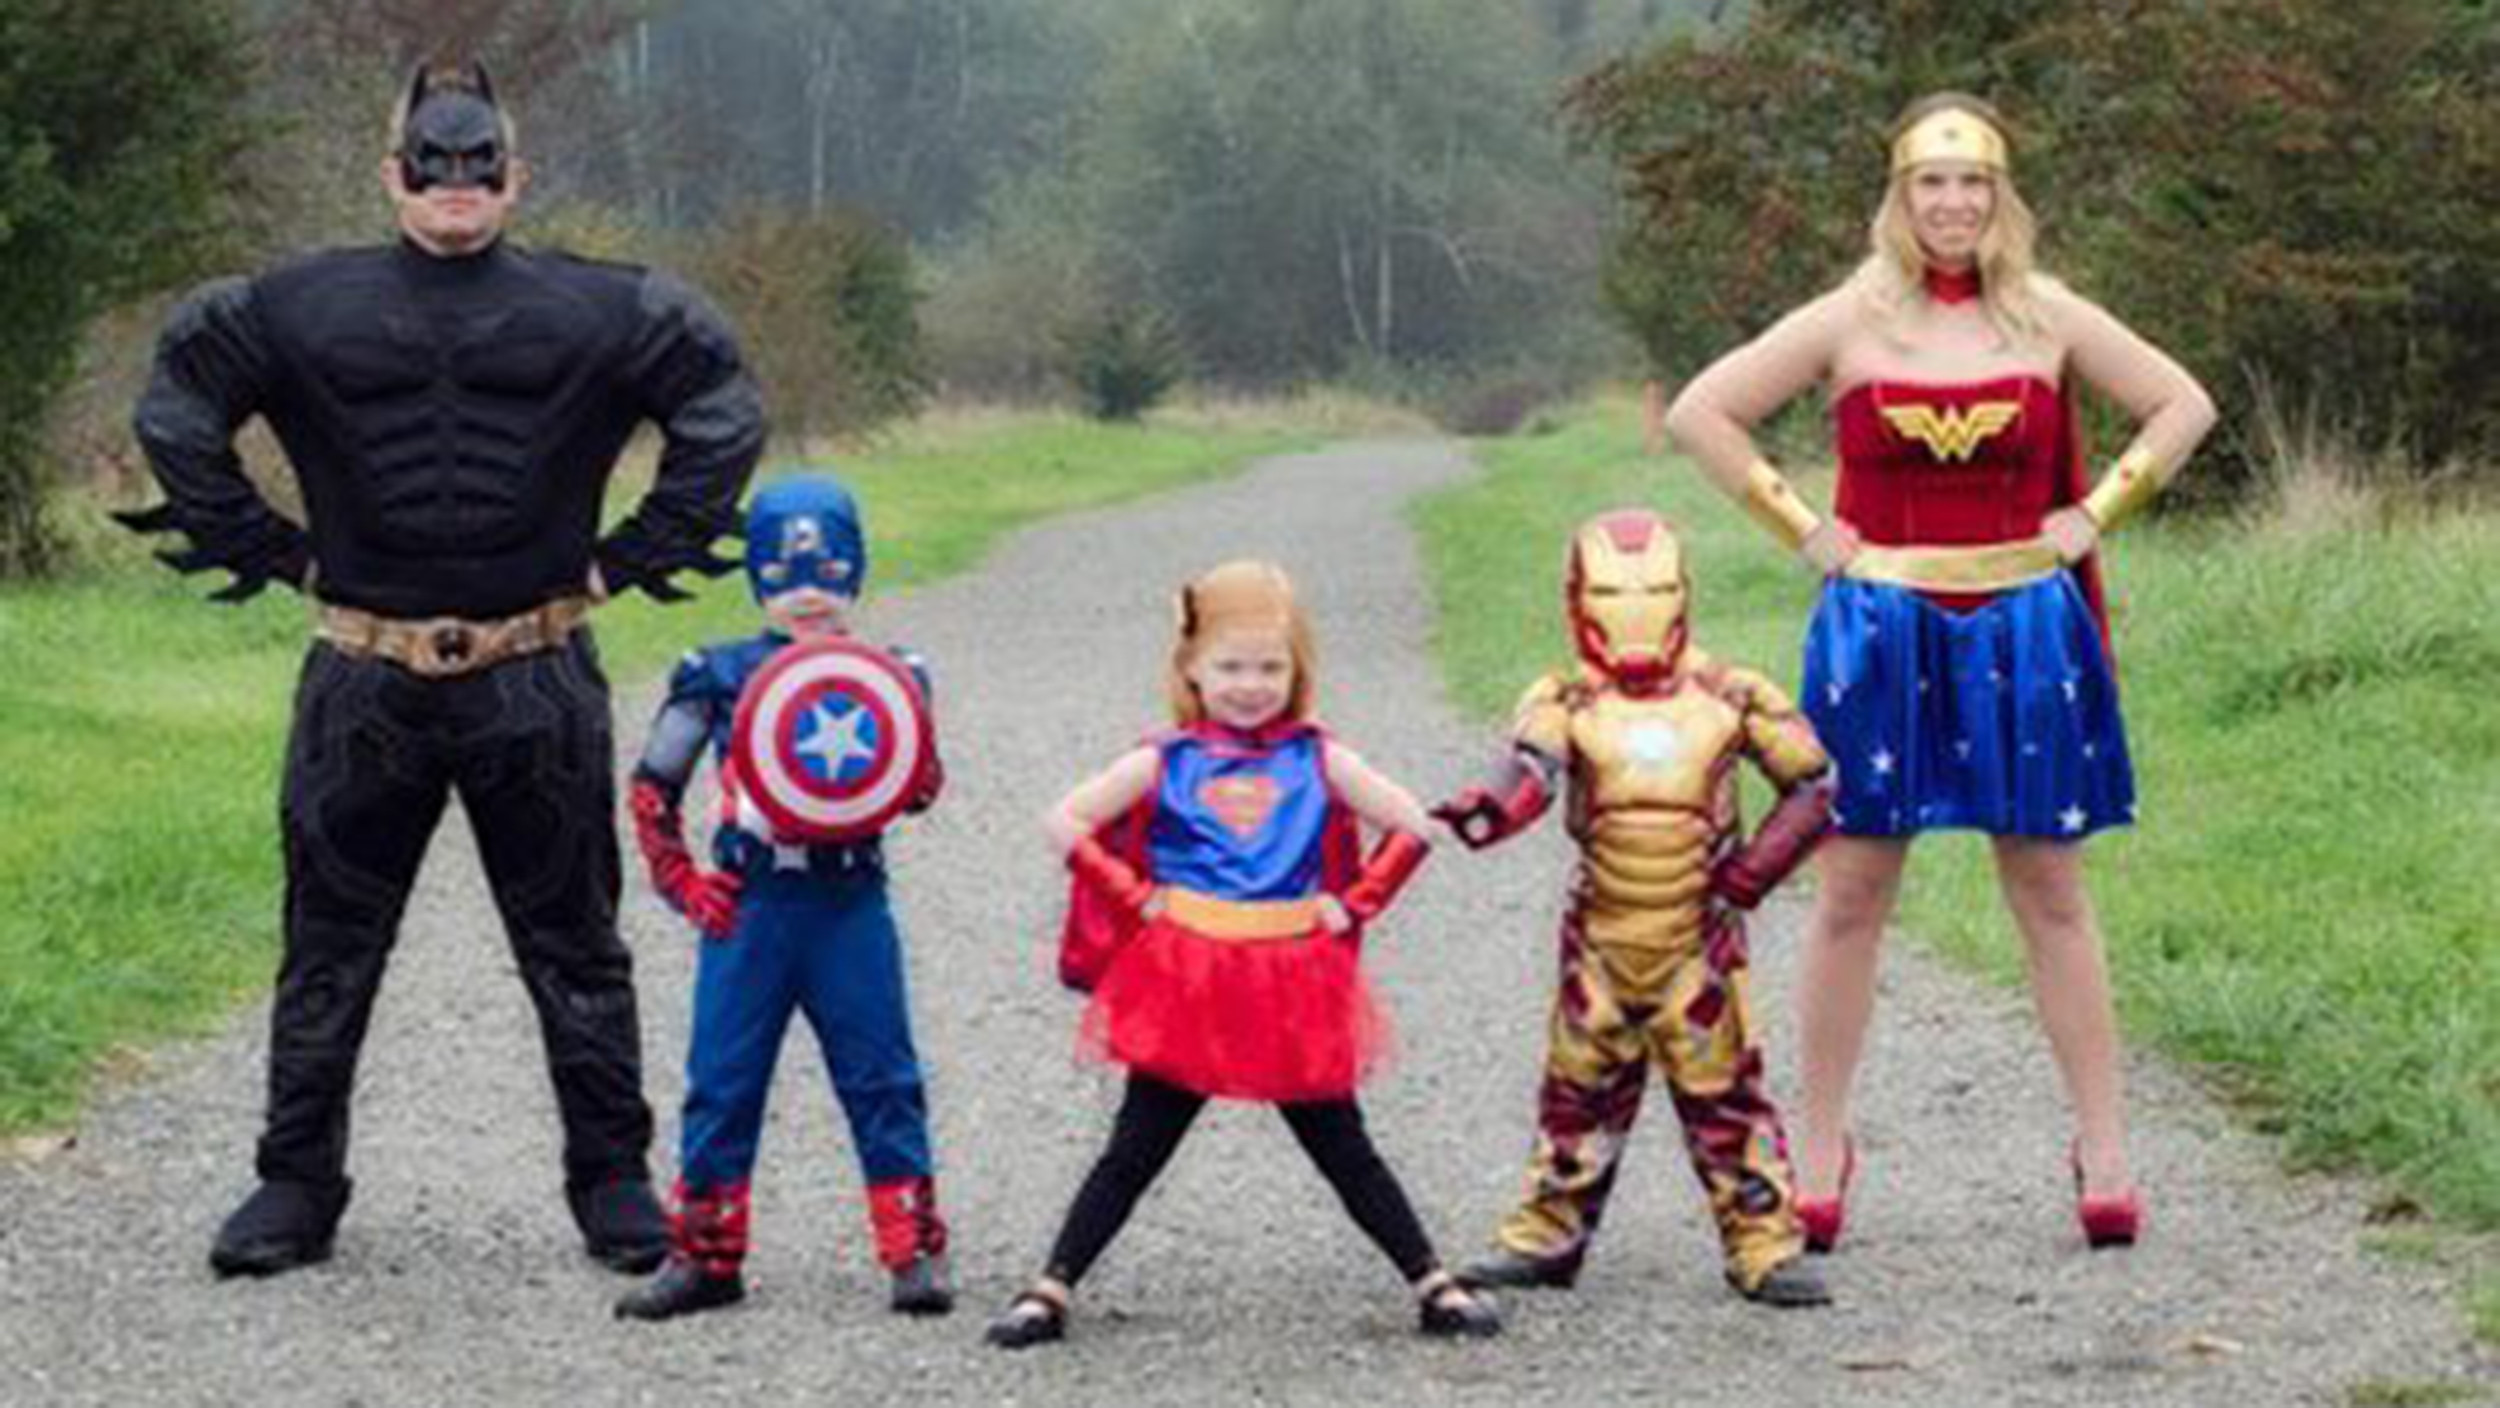 Family Of Four Halloween Costume Ideas
 19 of the cutest family theme costumes for Halloween